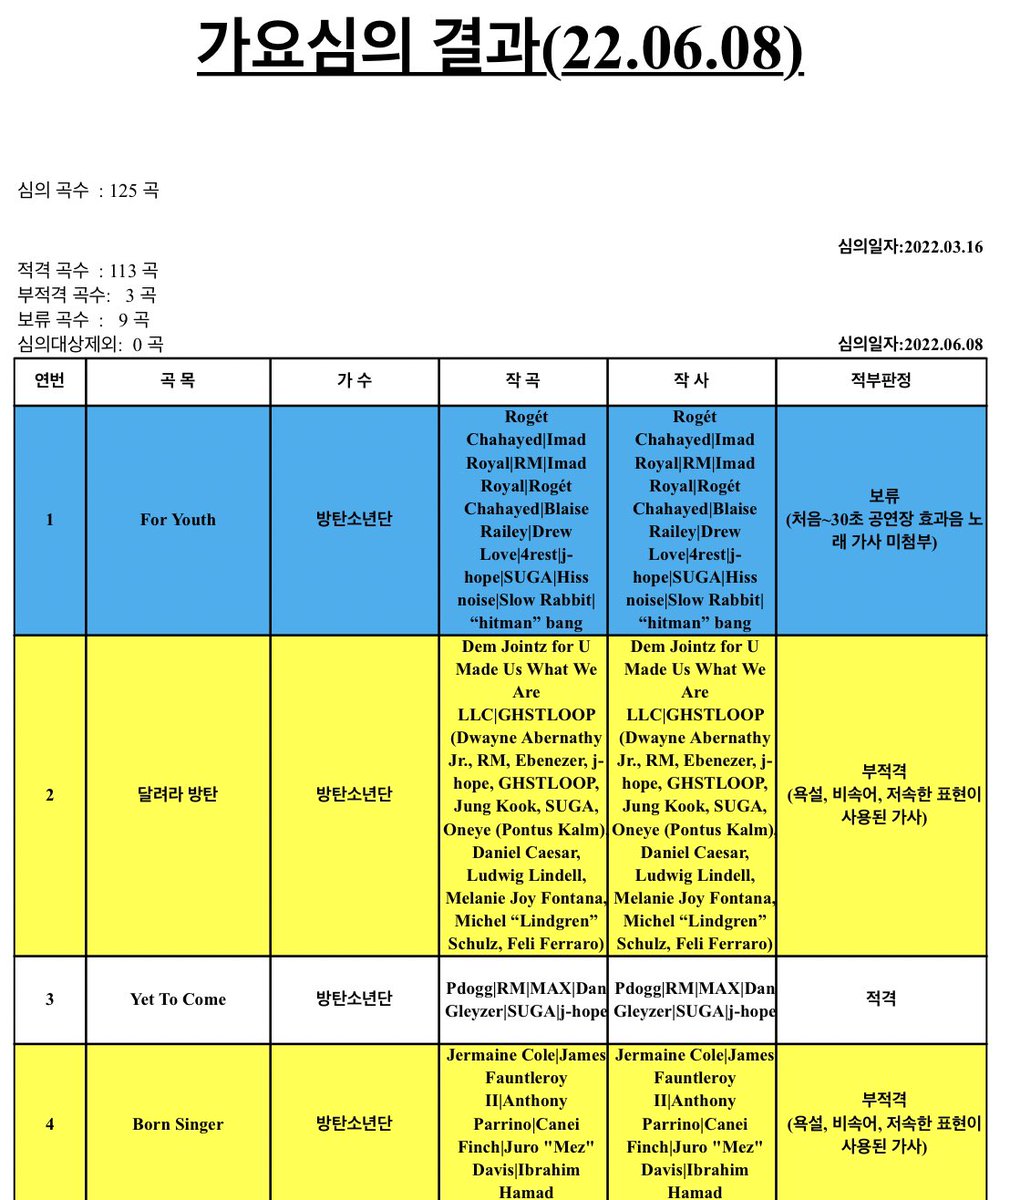 KBS Broadcast Review (@BTS_twt)

-For Youth - Pending (30 seconds of concert sounds, lyrics not confirmed)
-Run BTS - ineligible (swearing, language, etc.)
-Yet To Come - eligible
-Born Singer - ineligible (swearing, language, etc.)